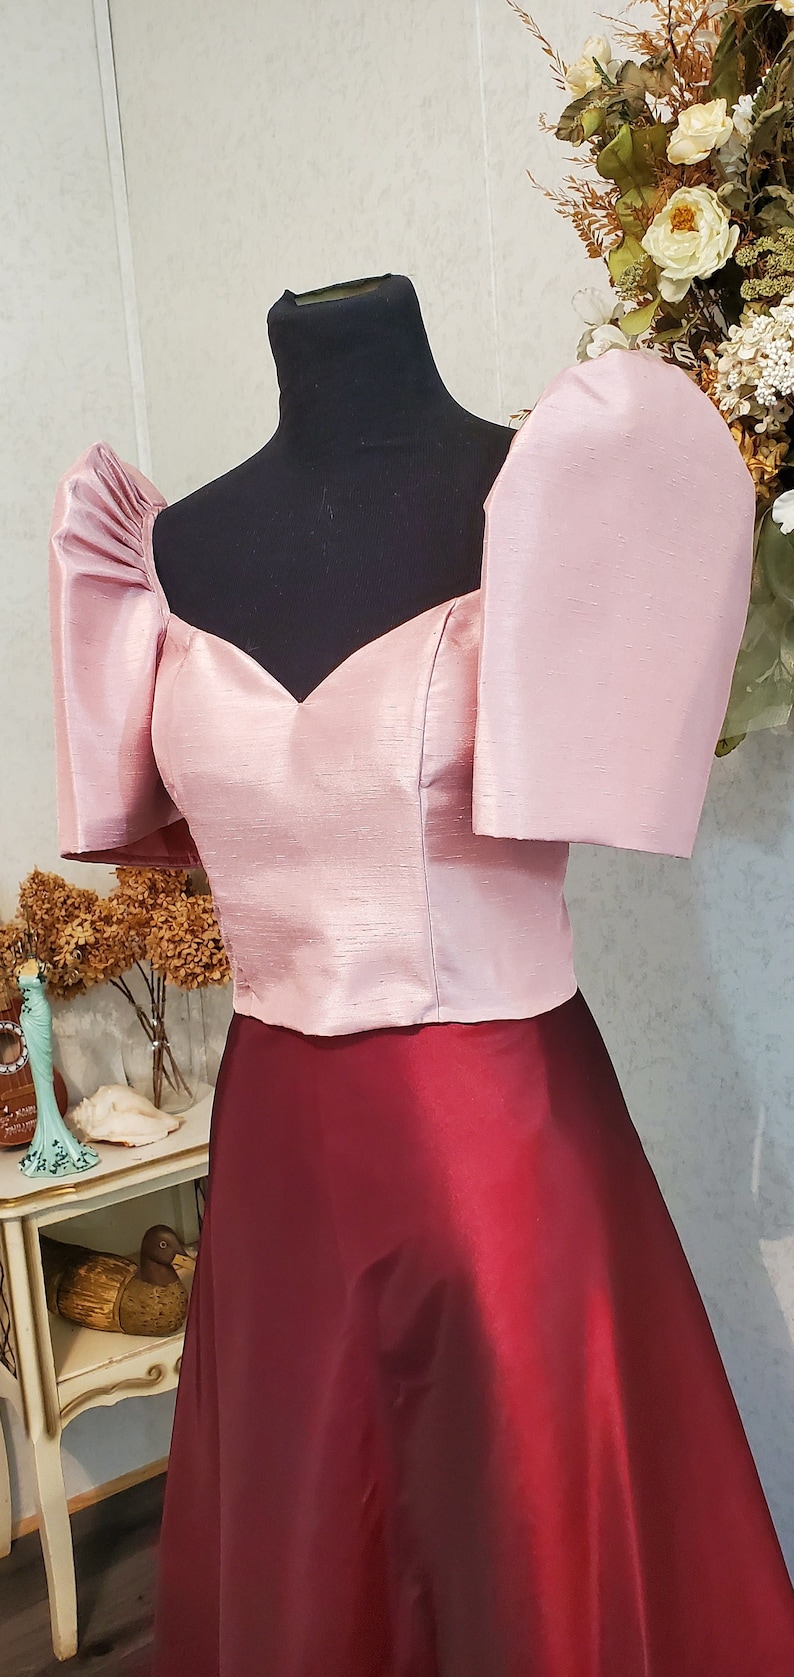 Dusty Rose Filipiniana Top Skirt Not Included - Etsy